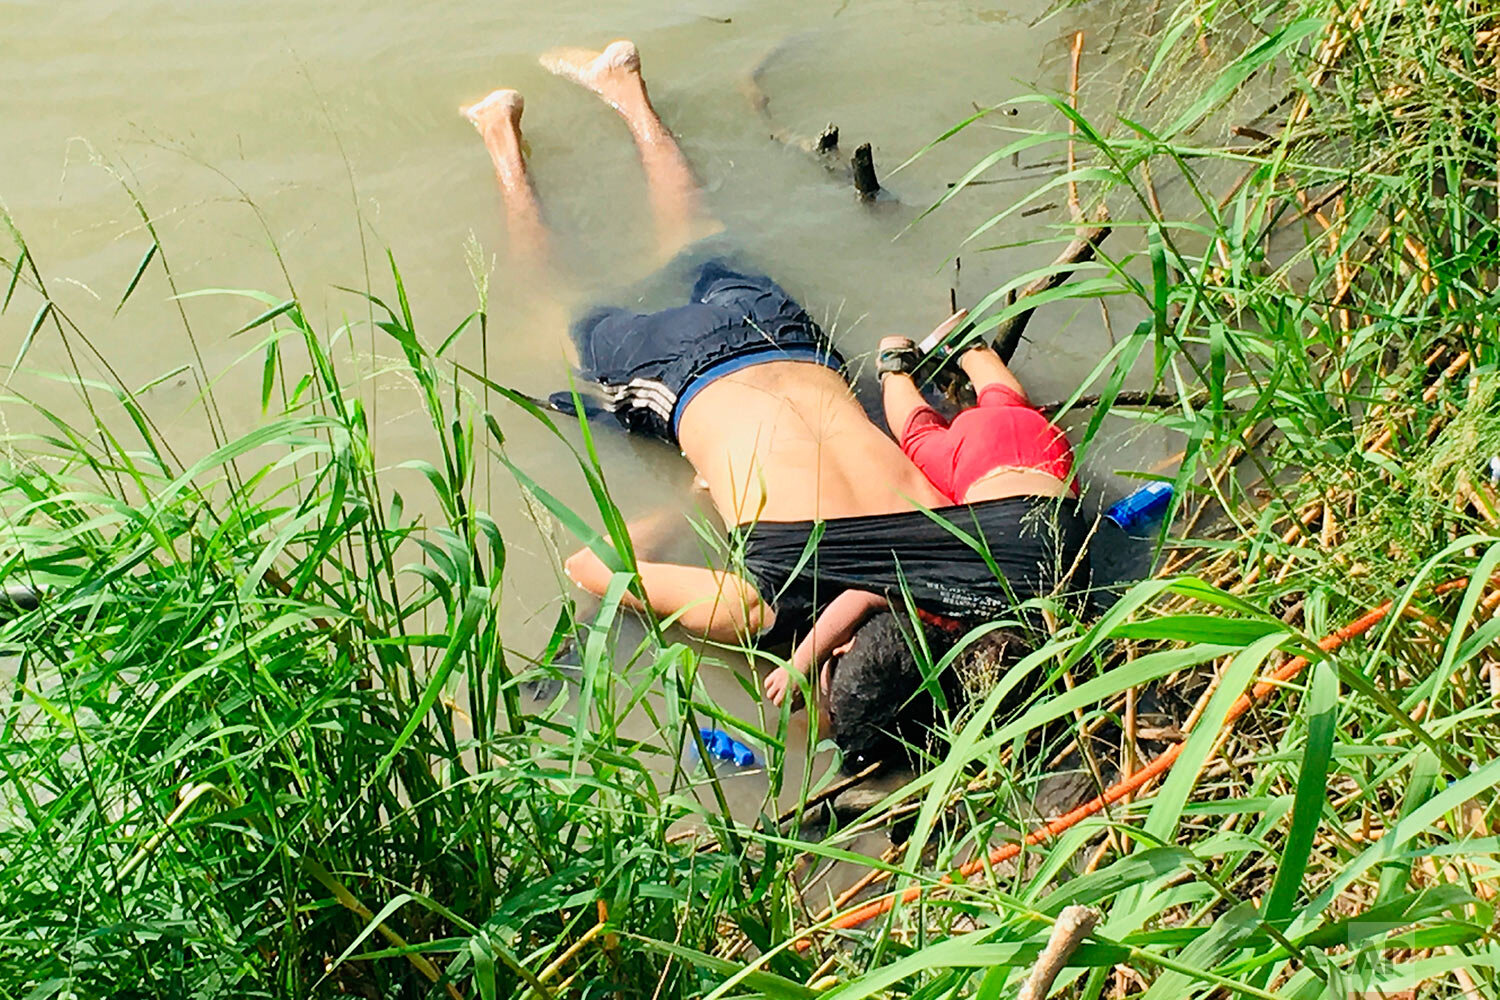  The bodies of Salvadoran migrant Oscar Alberto Martínez Ramírez and his nearly 2-year-old daughter Valeria lie on the bank of the Rio Grande in Matamoros, Mexico, on June 24, 2019, after they drowned trying to cross the river to Brownsville, Texas. 